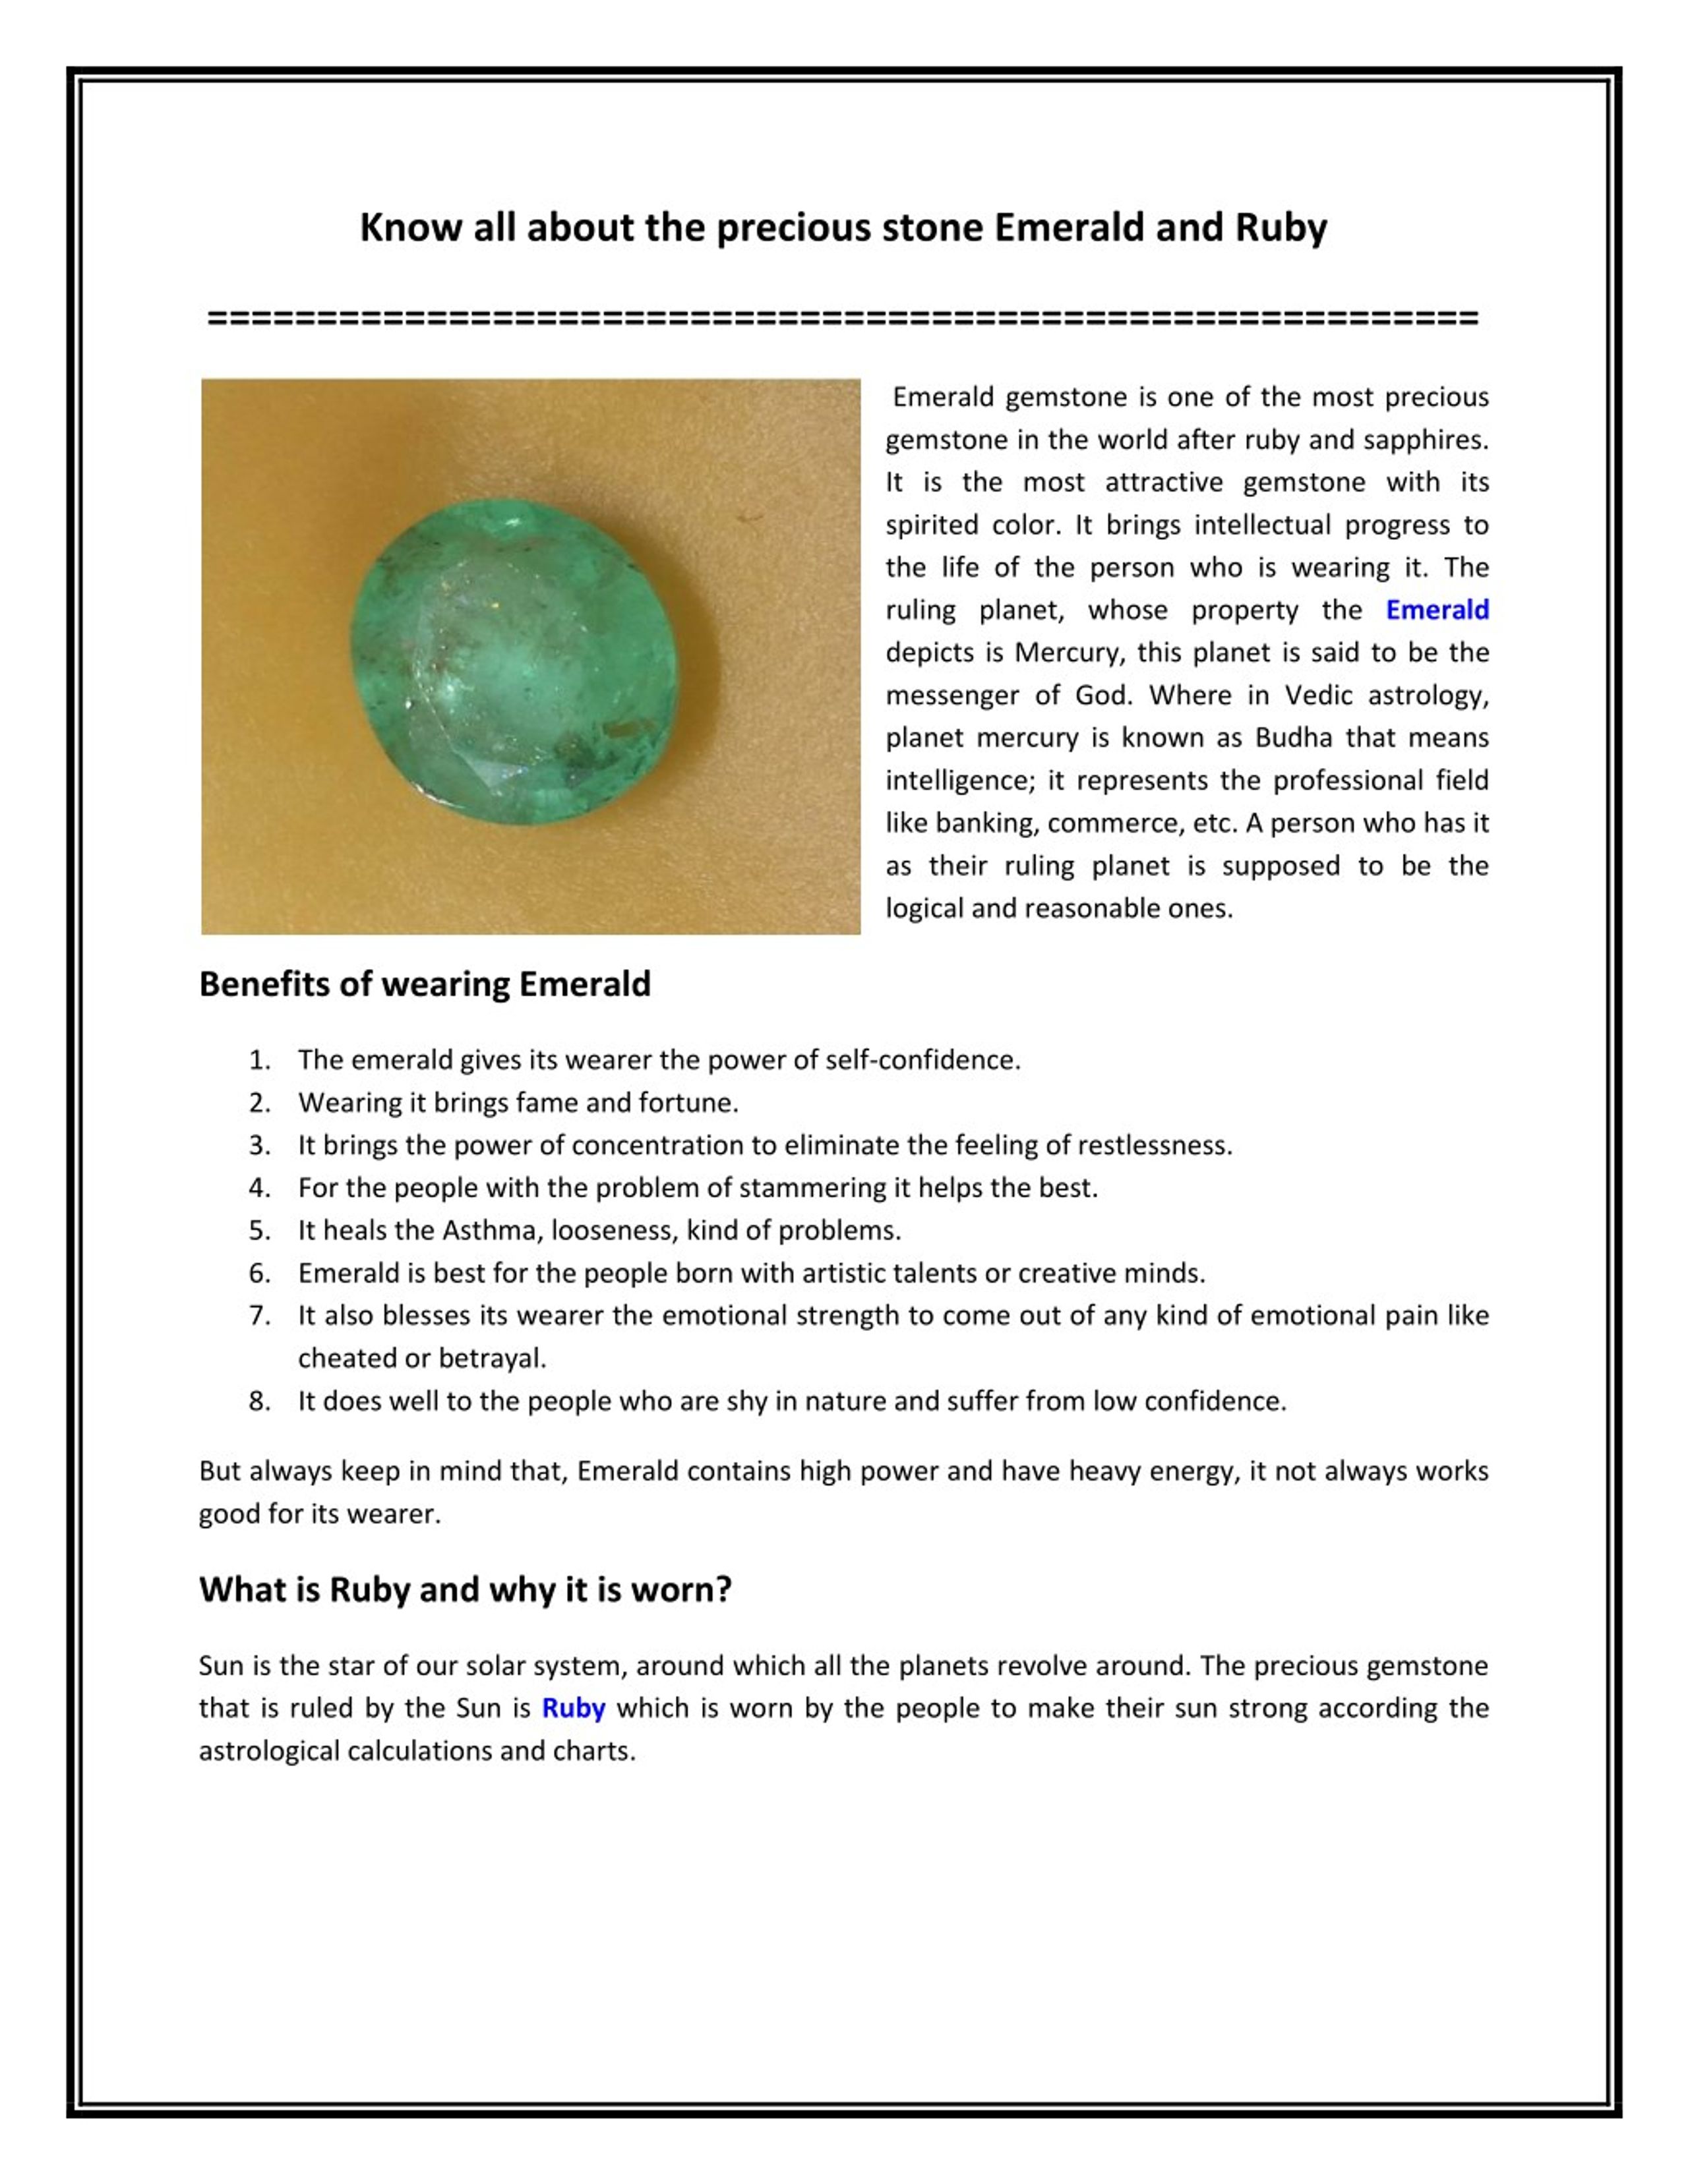 PPT - Know all about the precious stone Emerald and Ruby PowerPoint ...